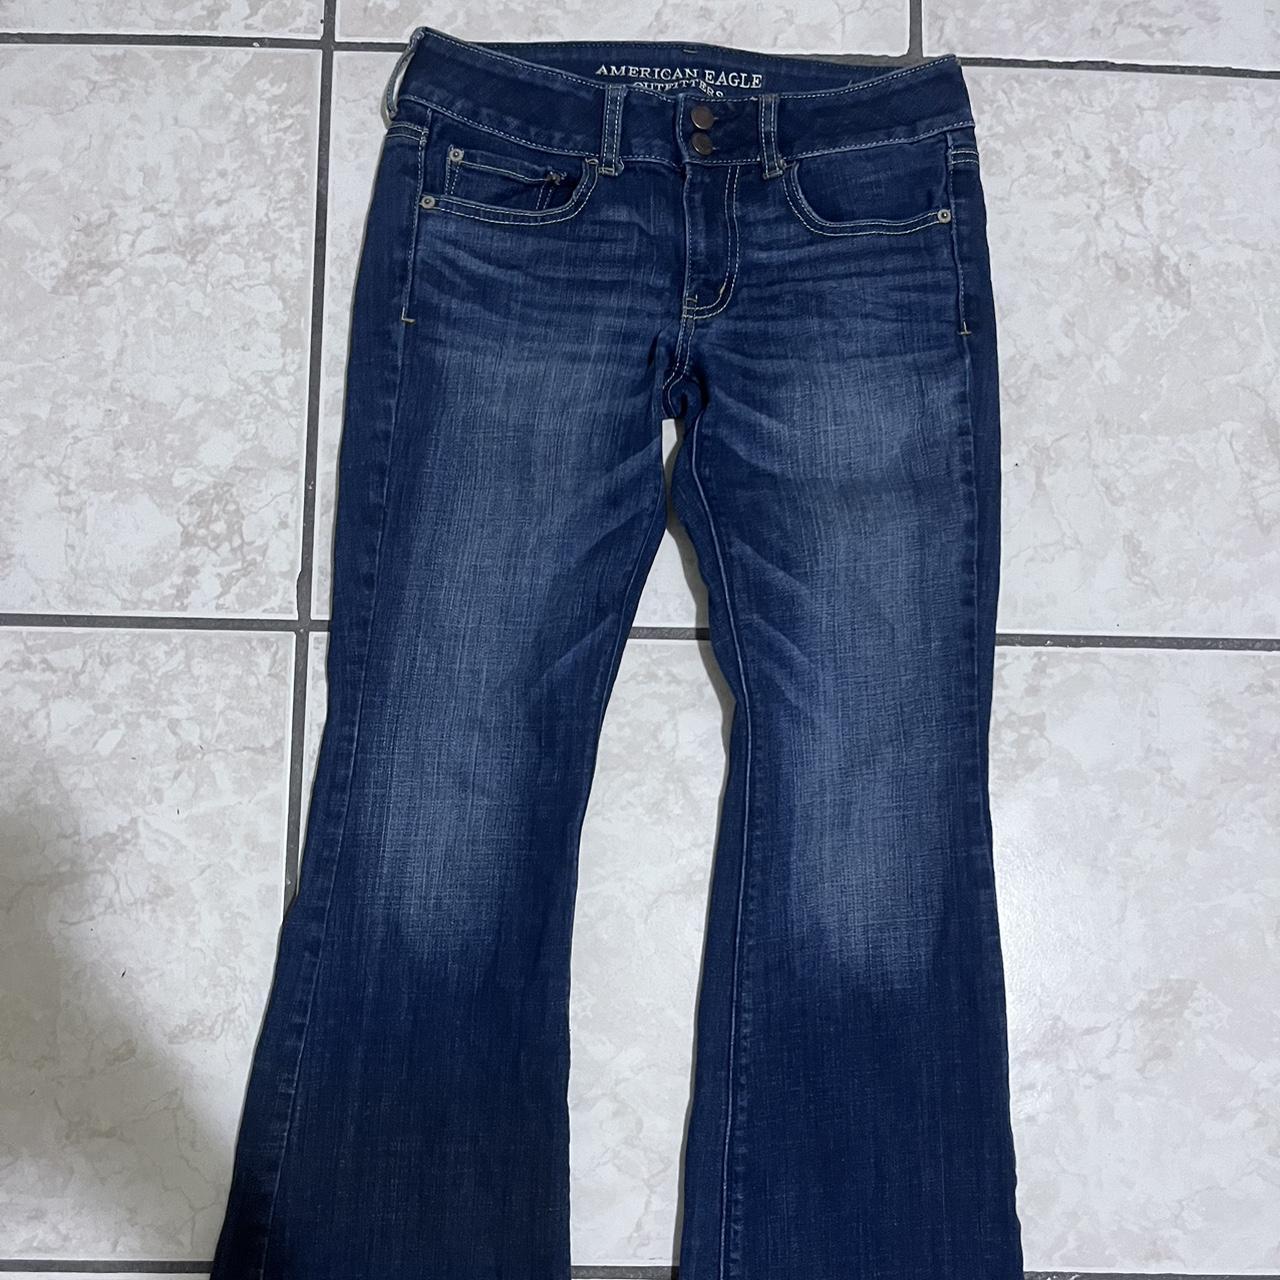 AMERICAN EAGLE flared jeans Size:6 fits 28-29 Hand - Depop